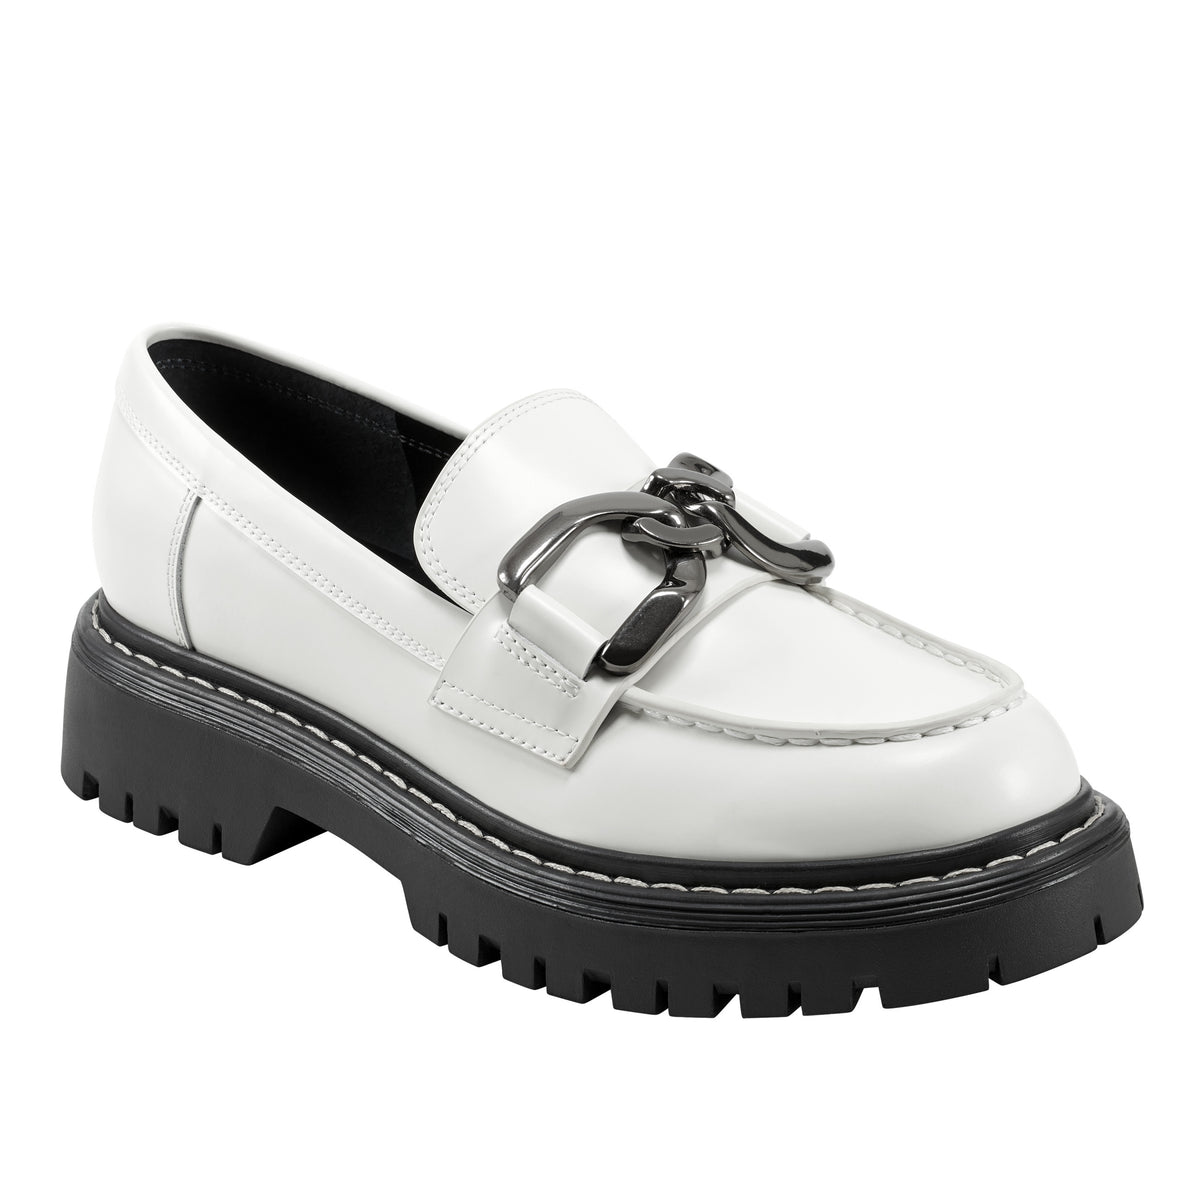 Trisca Lug Sole Chain Loafer